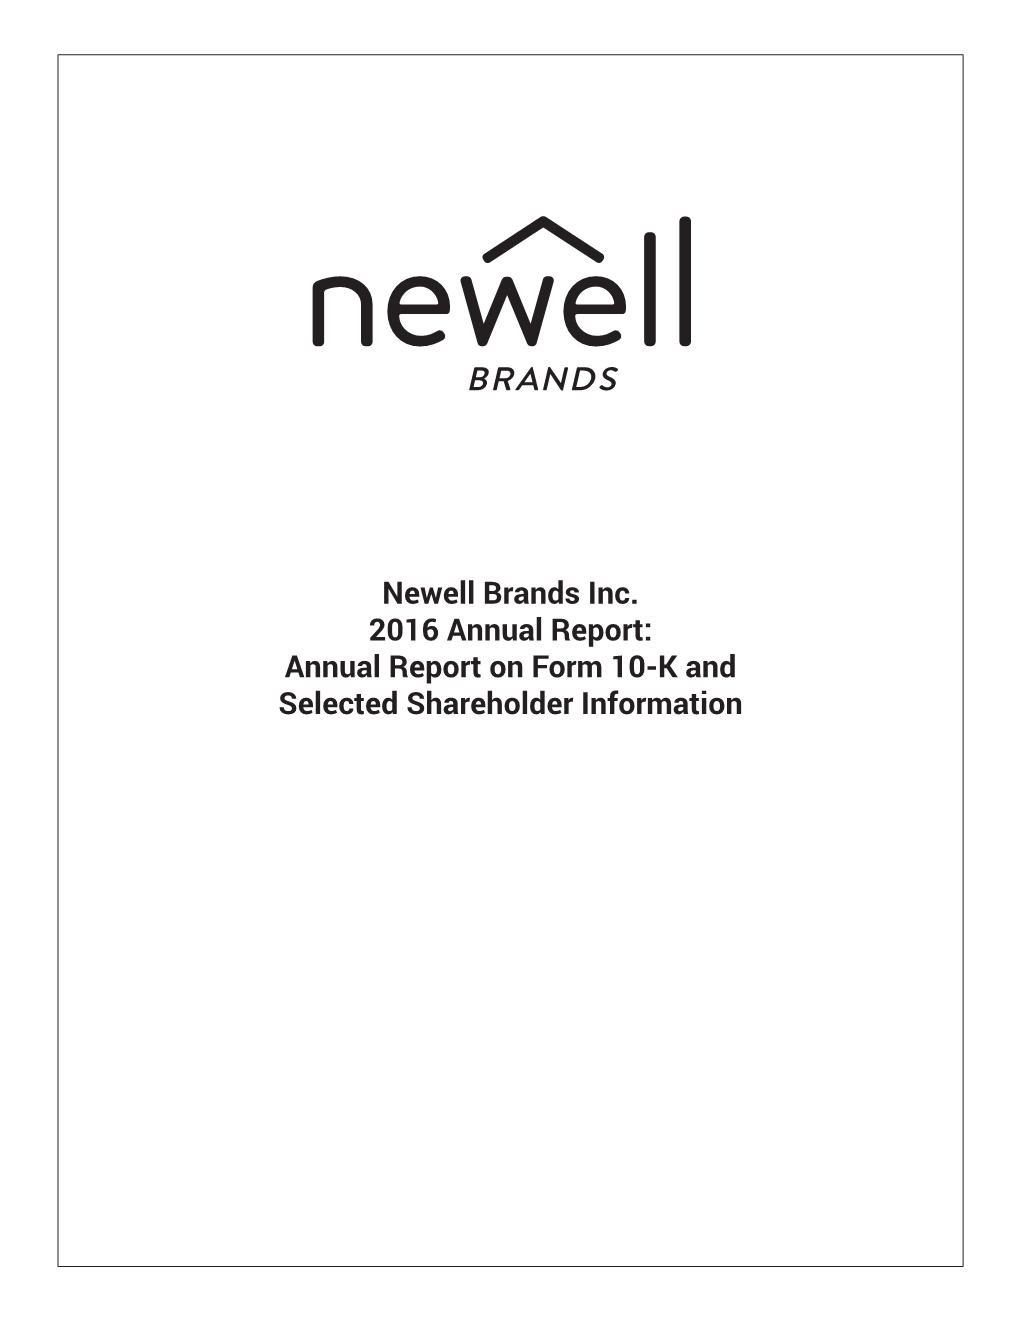 Newell Brands Inc. 2016 Annual Report